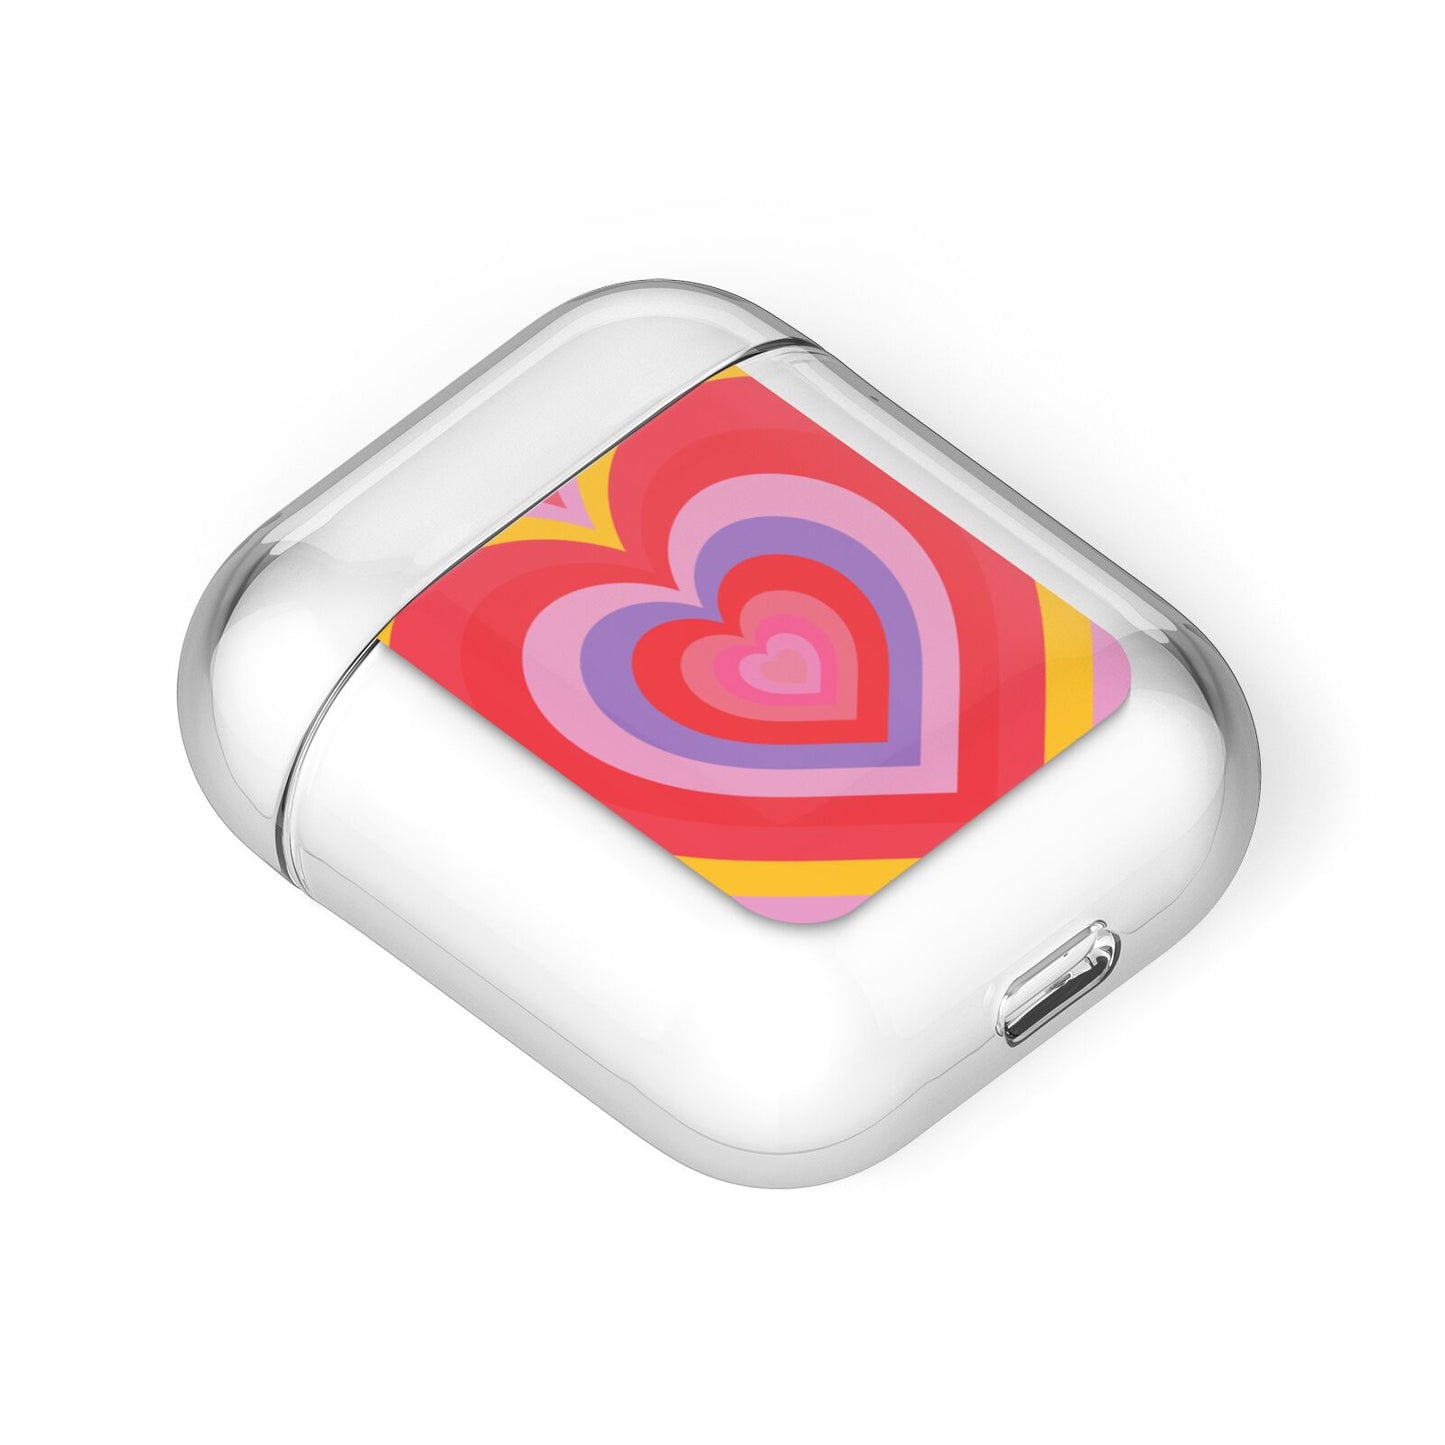 Seventies Heart AirPods Case Laid Flat